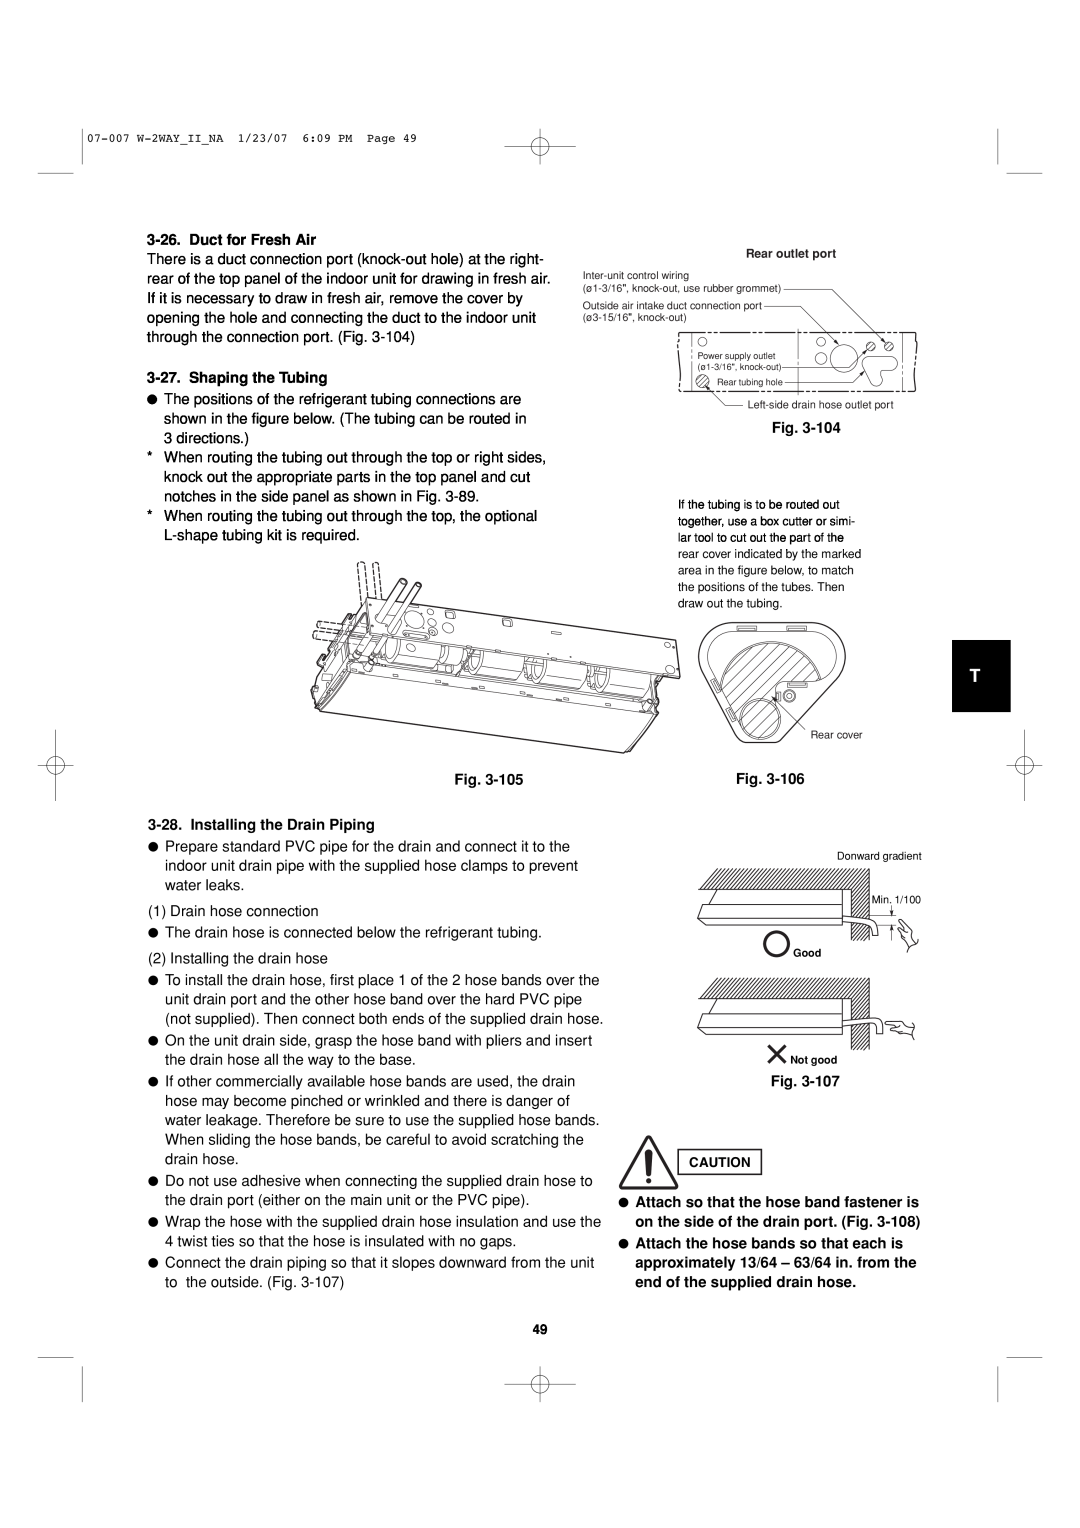 Sanyo 85464359982001 installation instructions Duct for Fresh Air, Shaping the Tubing, 28.Installing the Drain Piping, Fig 